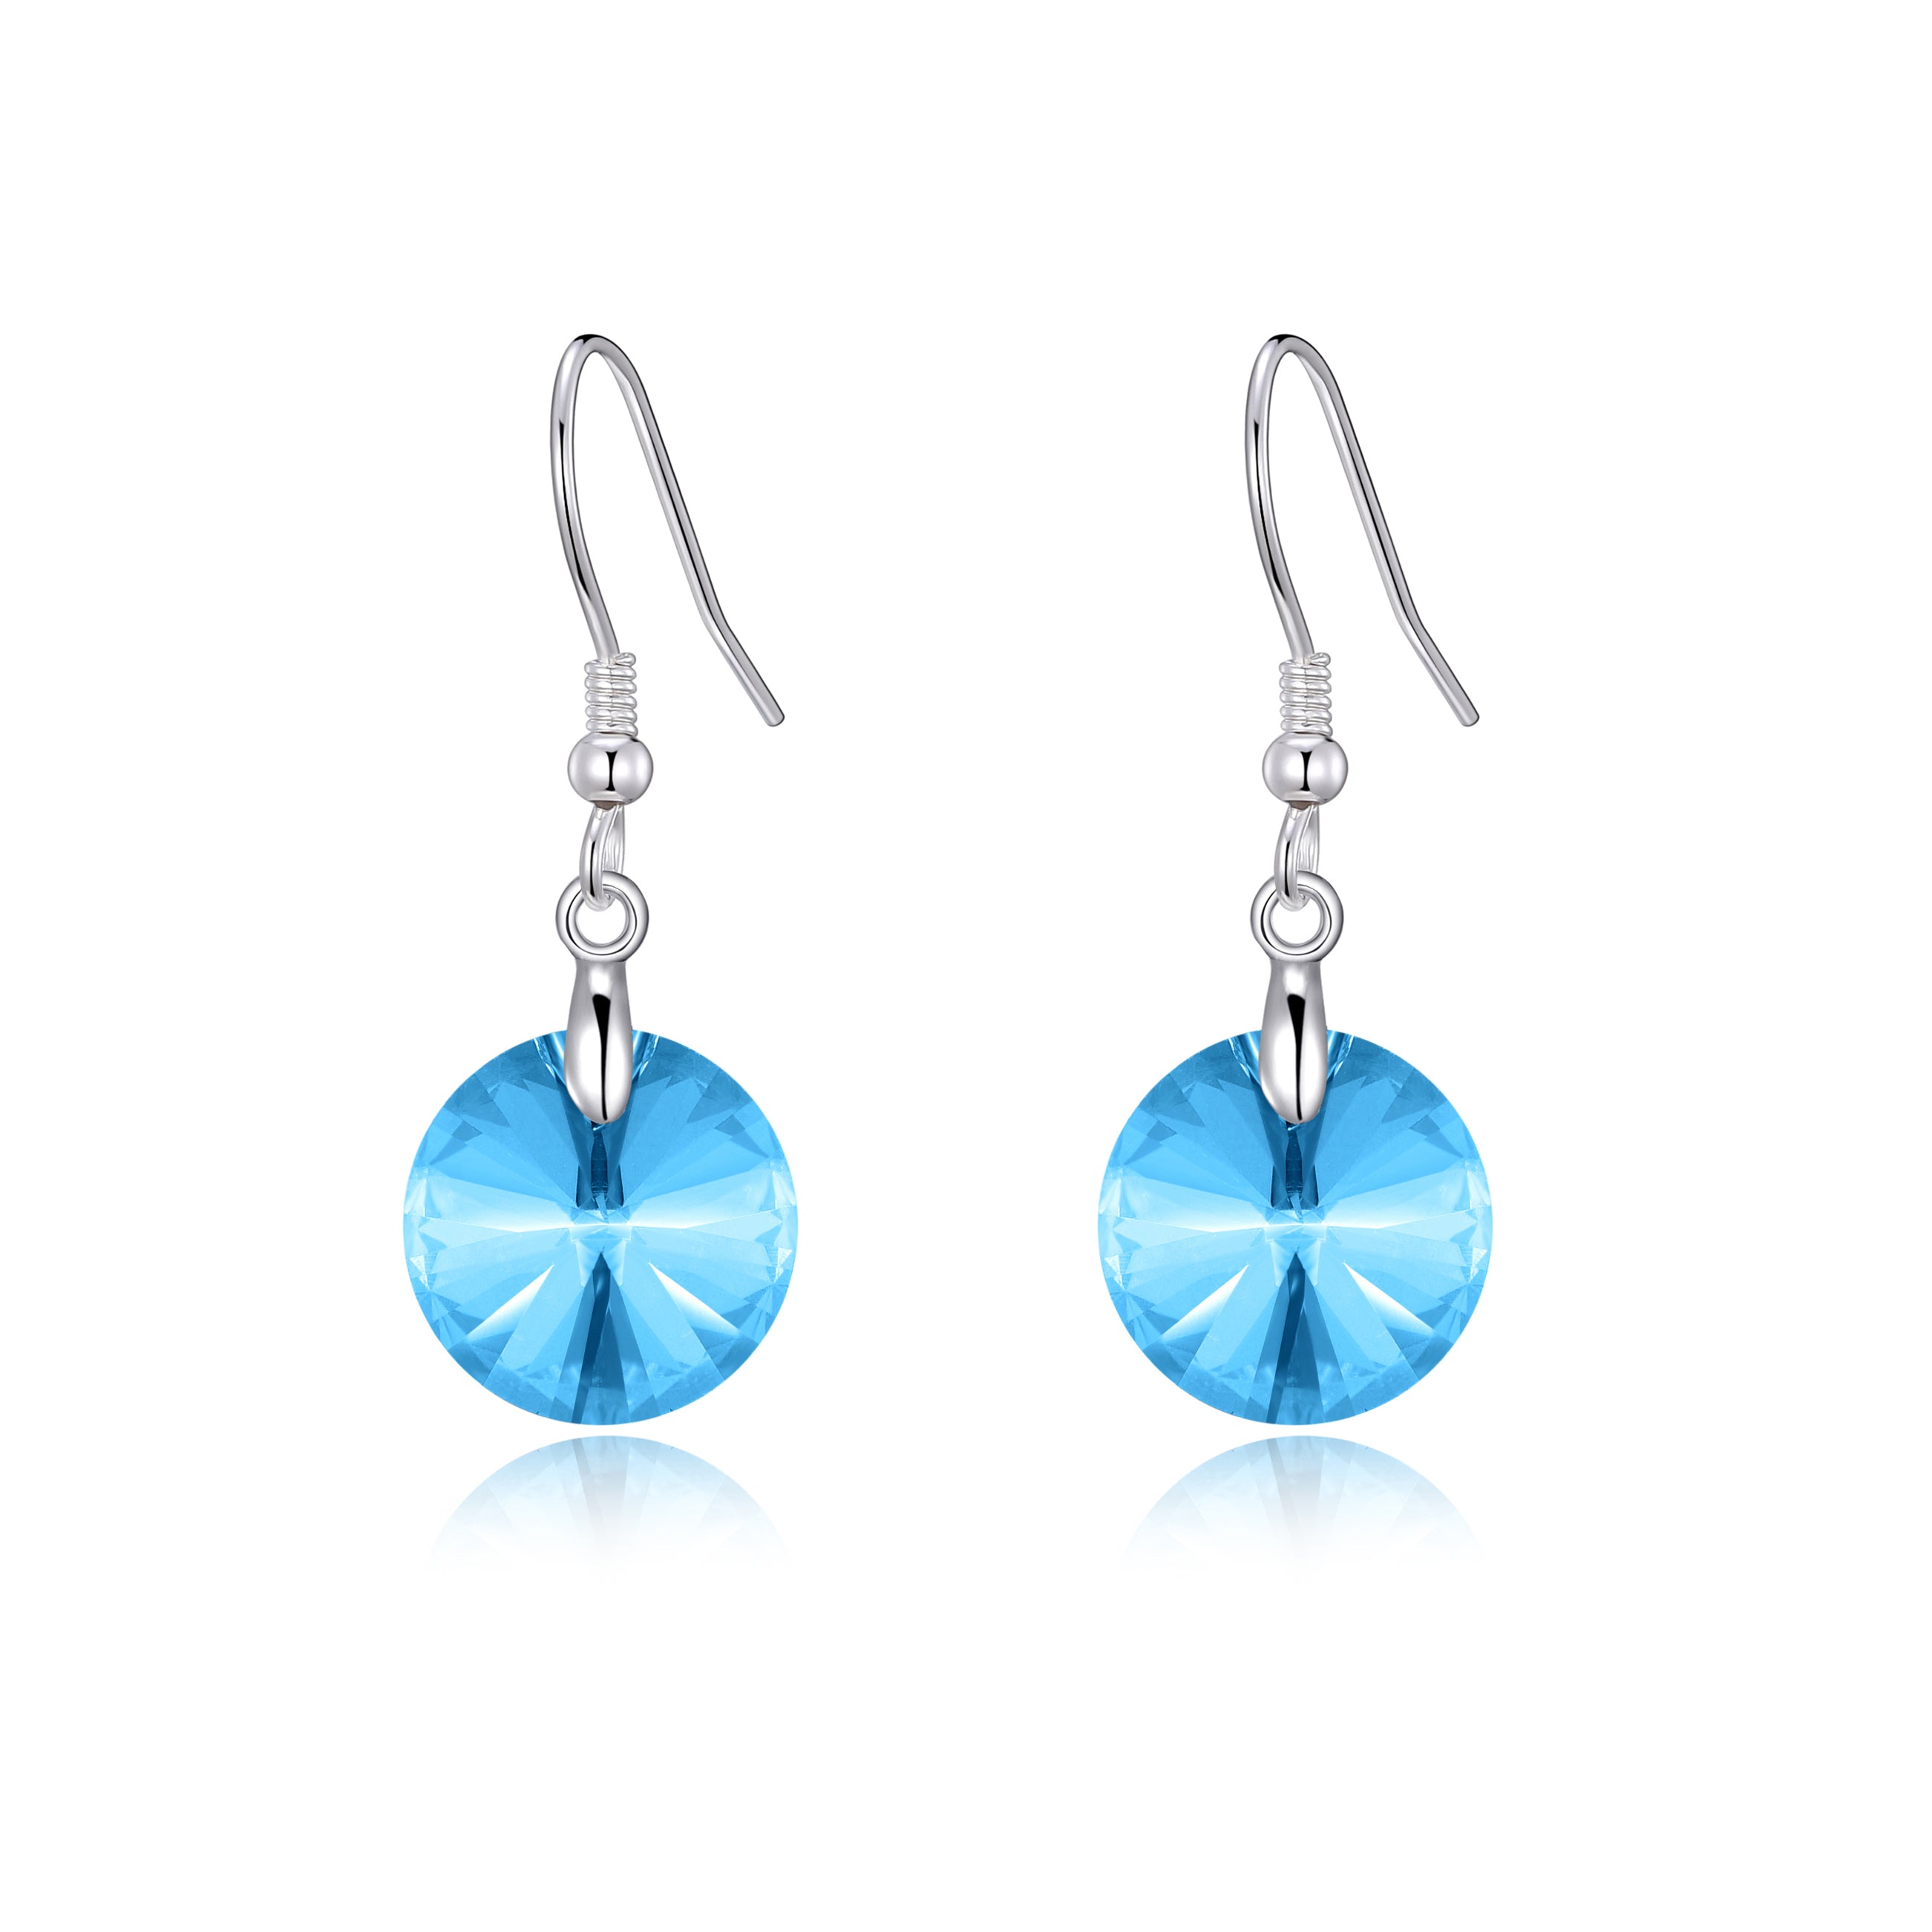 Sterling Silver Aquamarine Earrings Created with Zircondia® Crystals by Philip Jones Jewellery